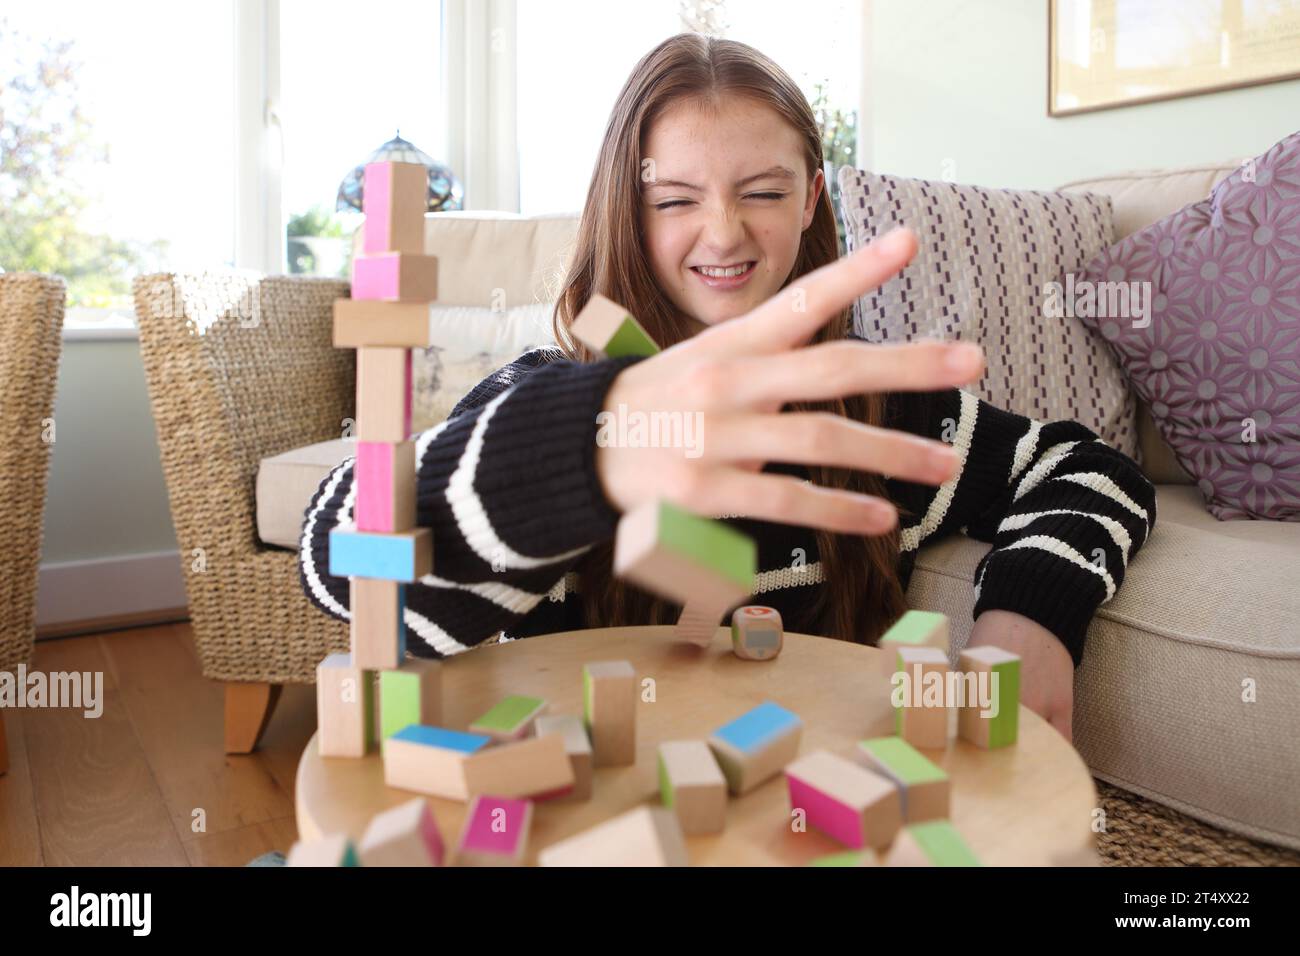 Teenage girl constructing a wall of wooden blocks and building a tower Stock Photo